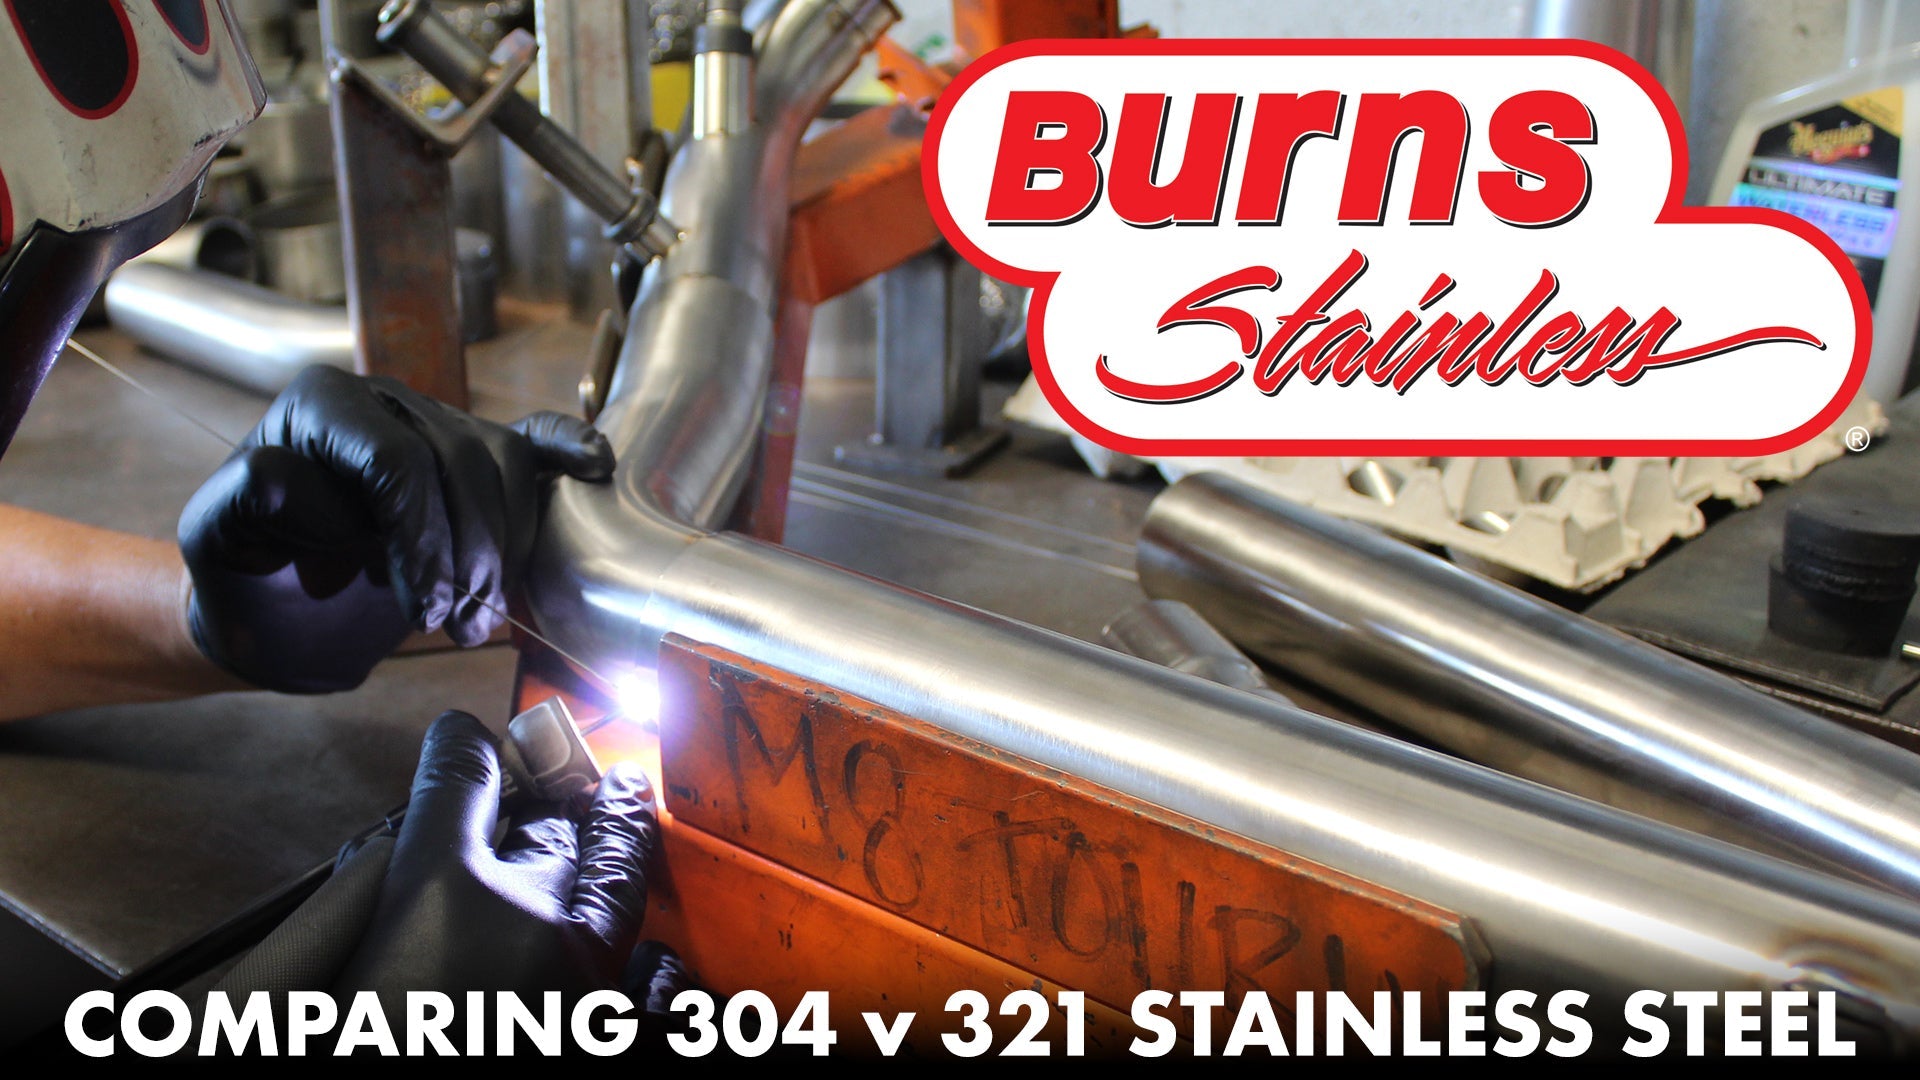 Stainless Steels for Exhaust Systems - Comparing 304/321 and More